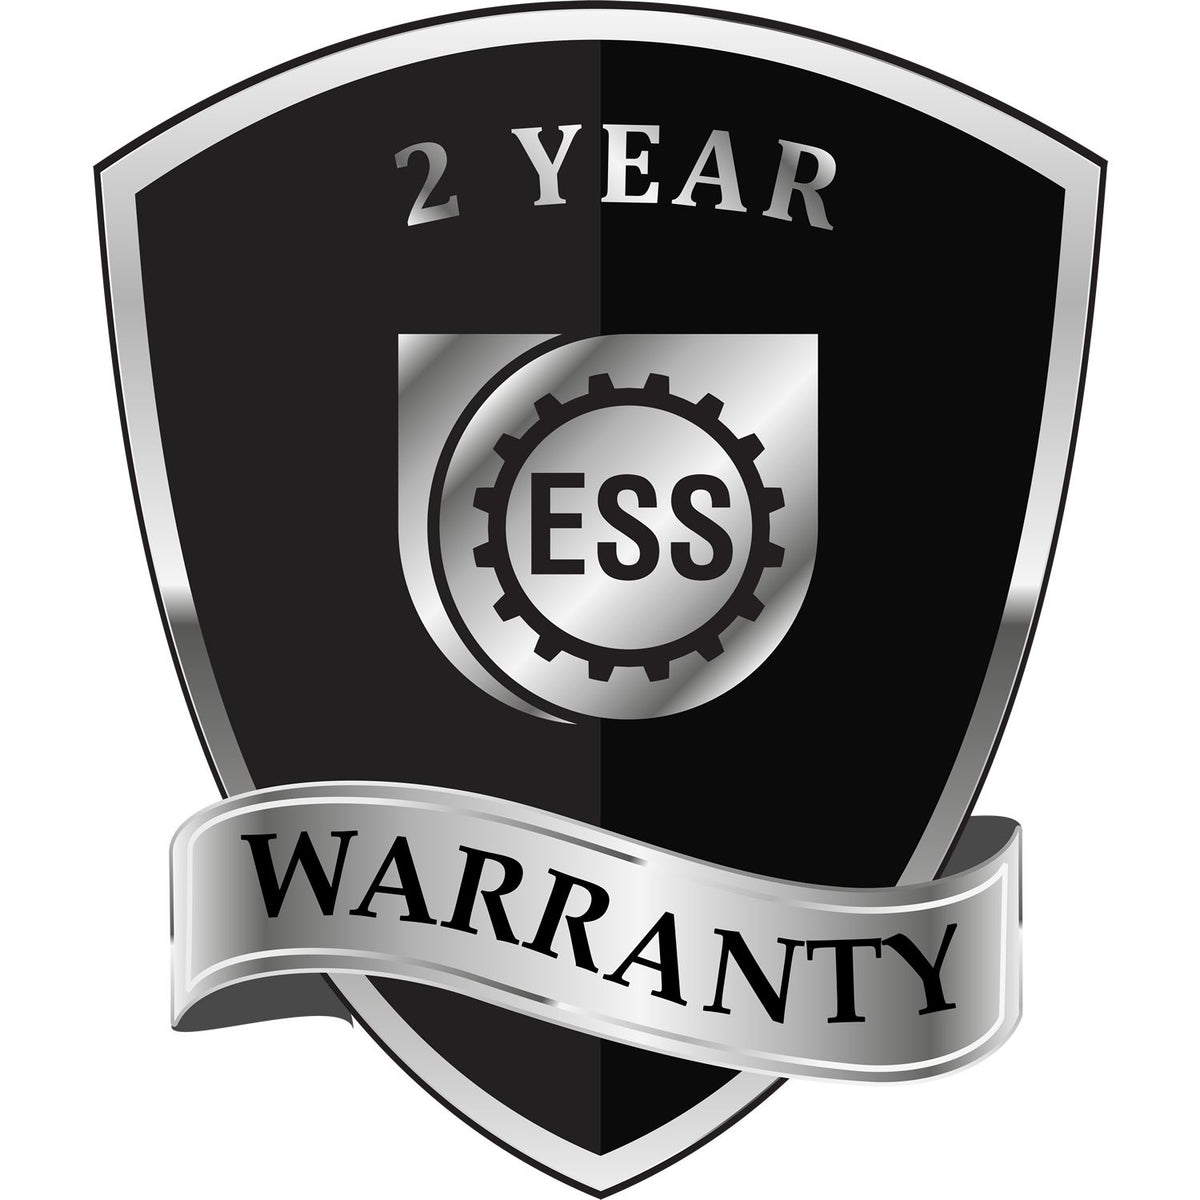 A badge or emblem showing a warranty icon for the Extended Long Reach Delaware Architect Seal Embosser